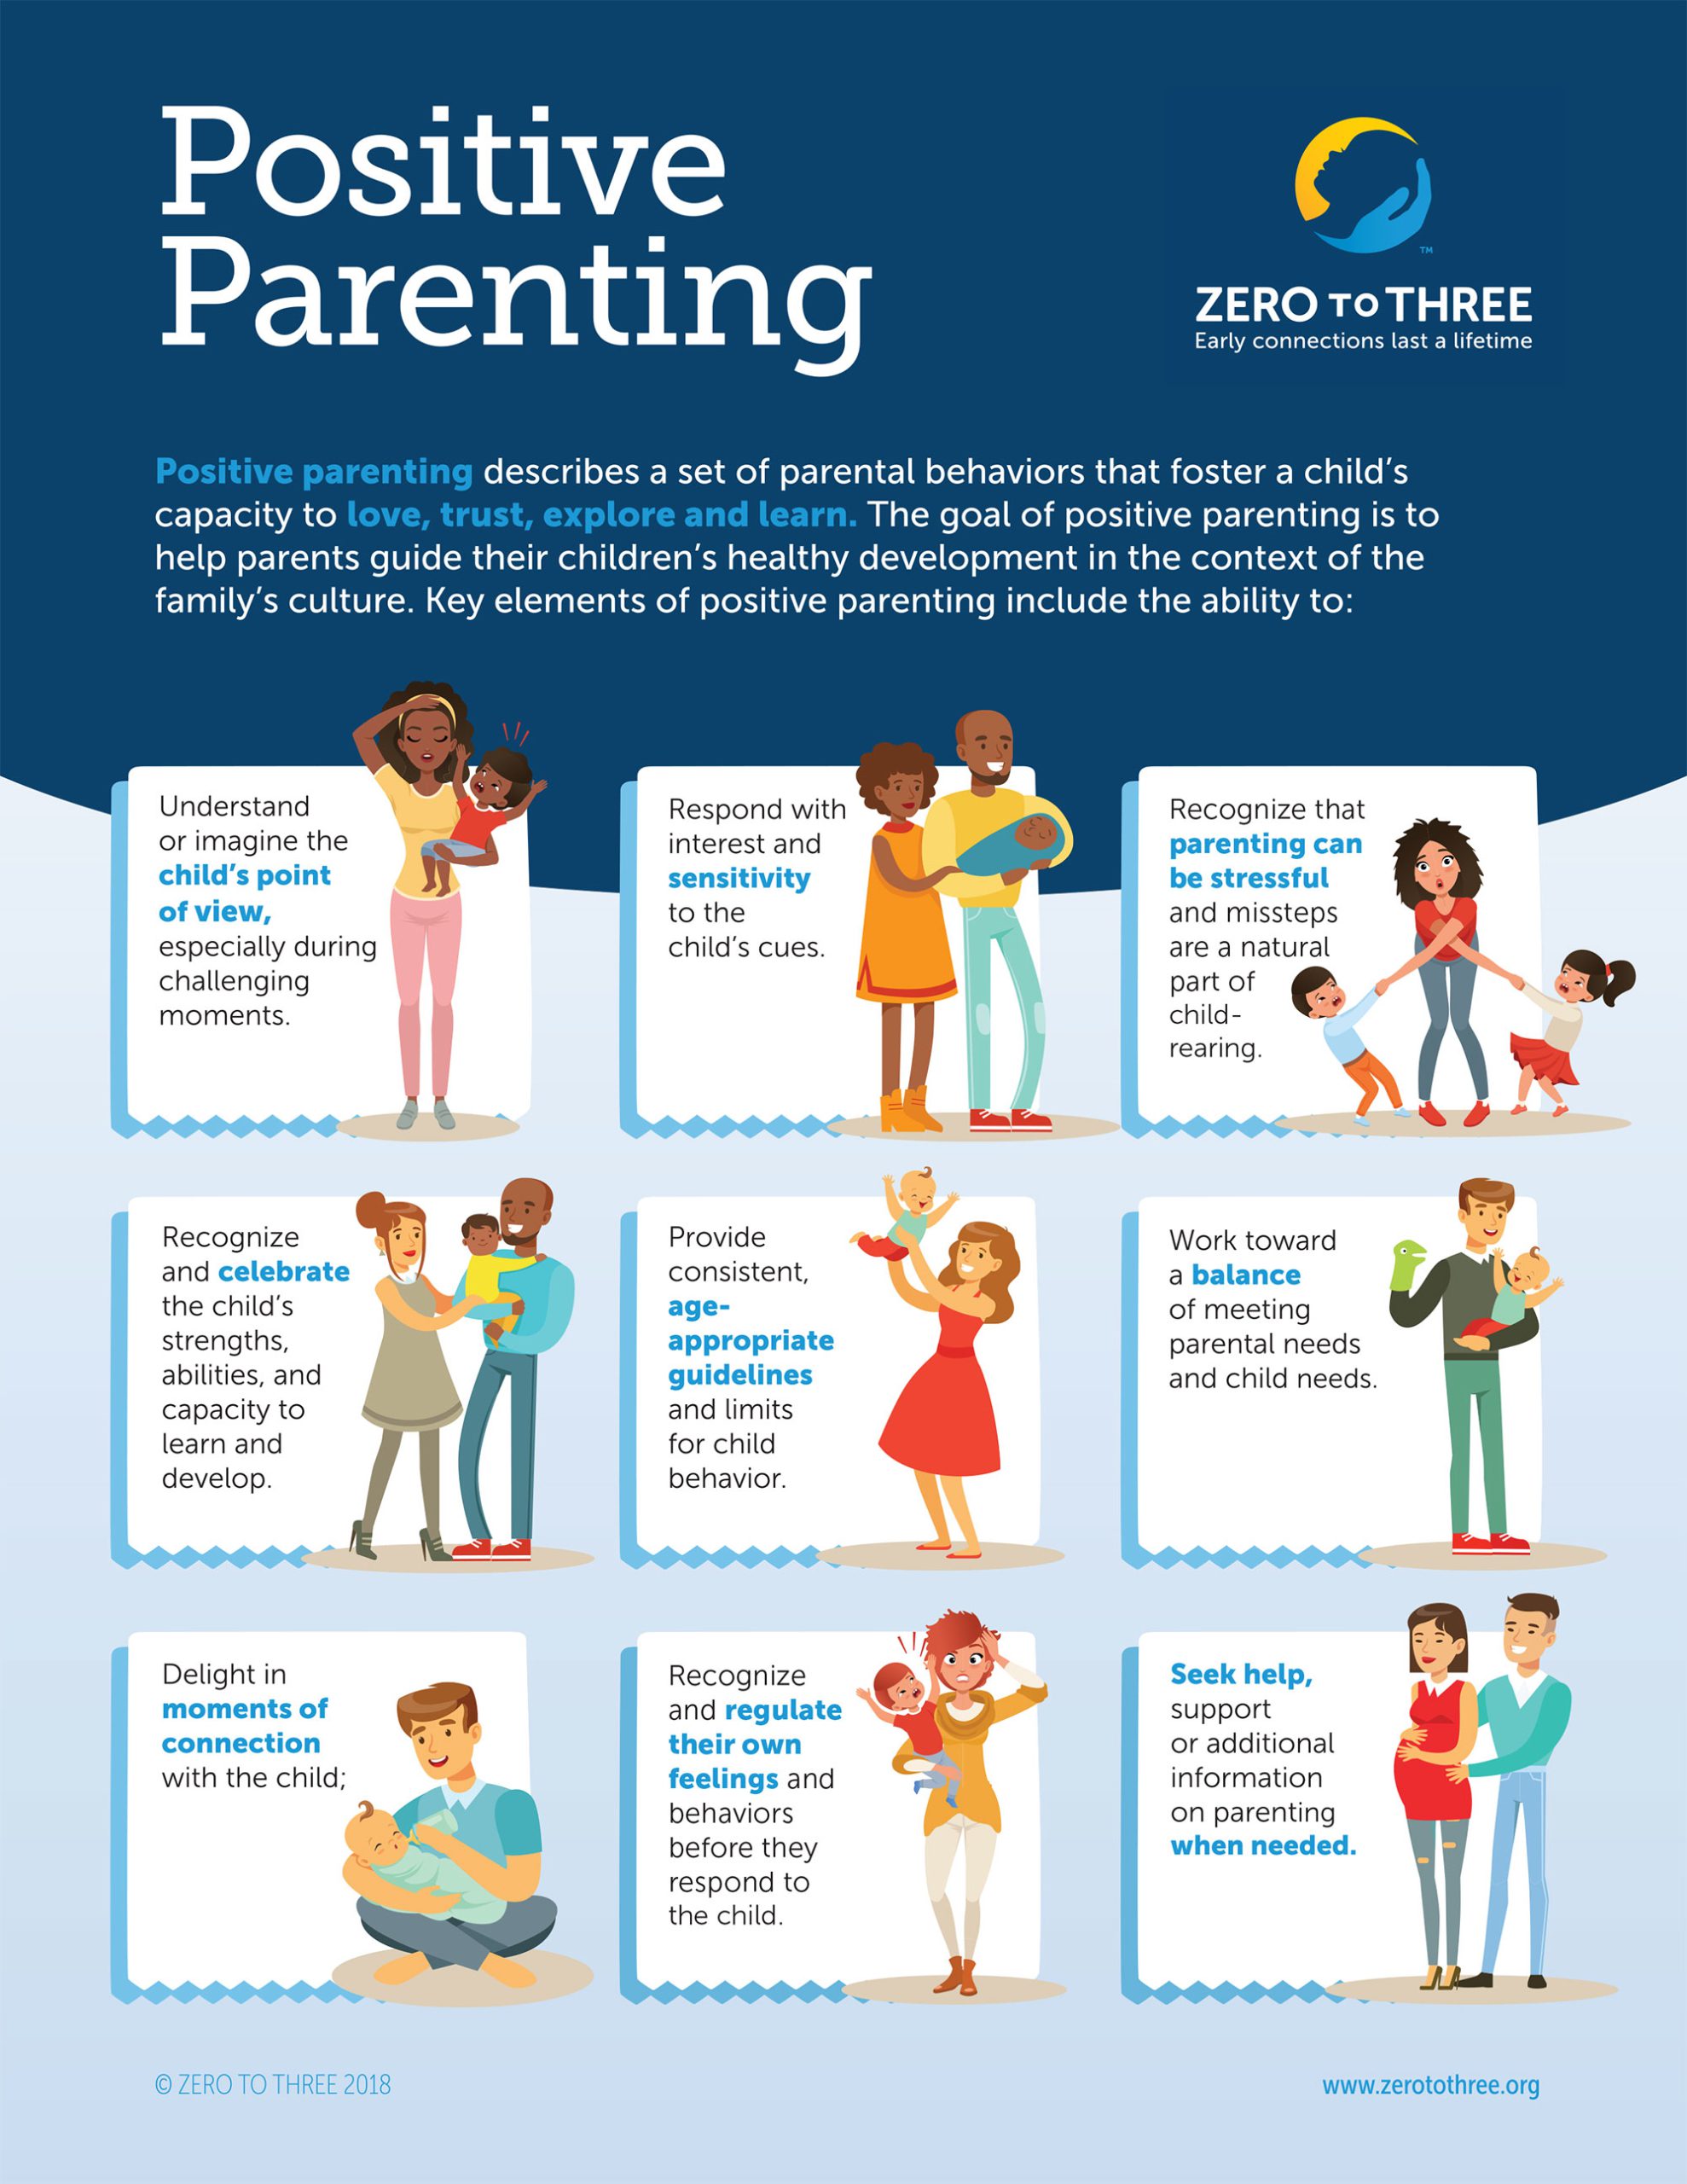 a research team designed a study of parenting